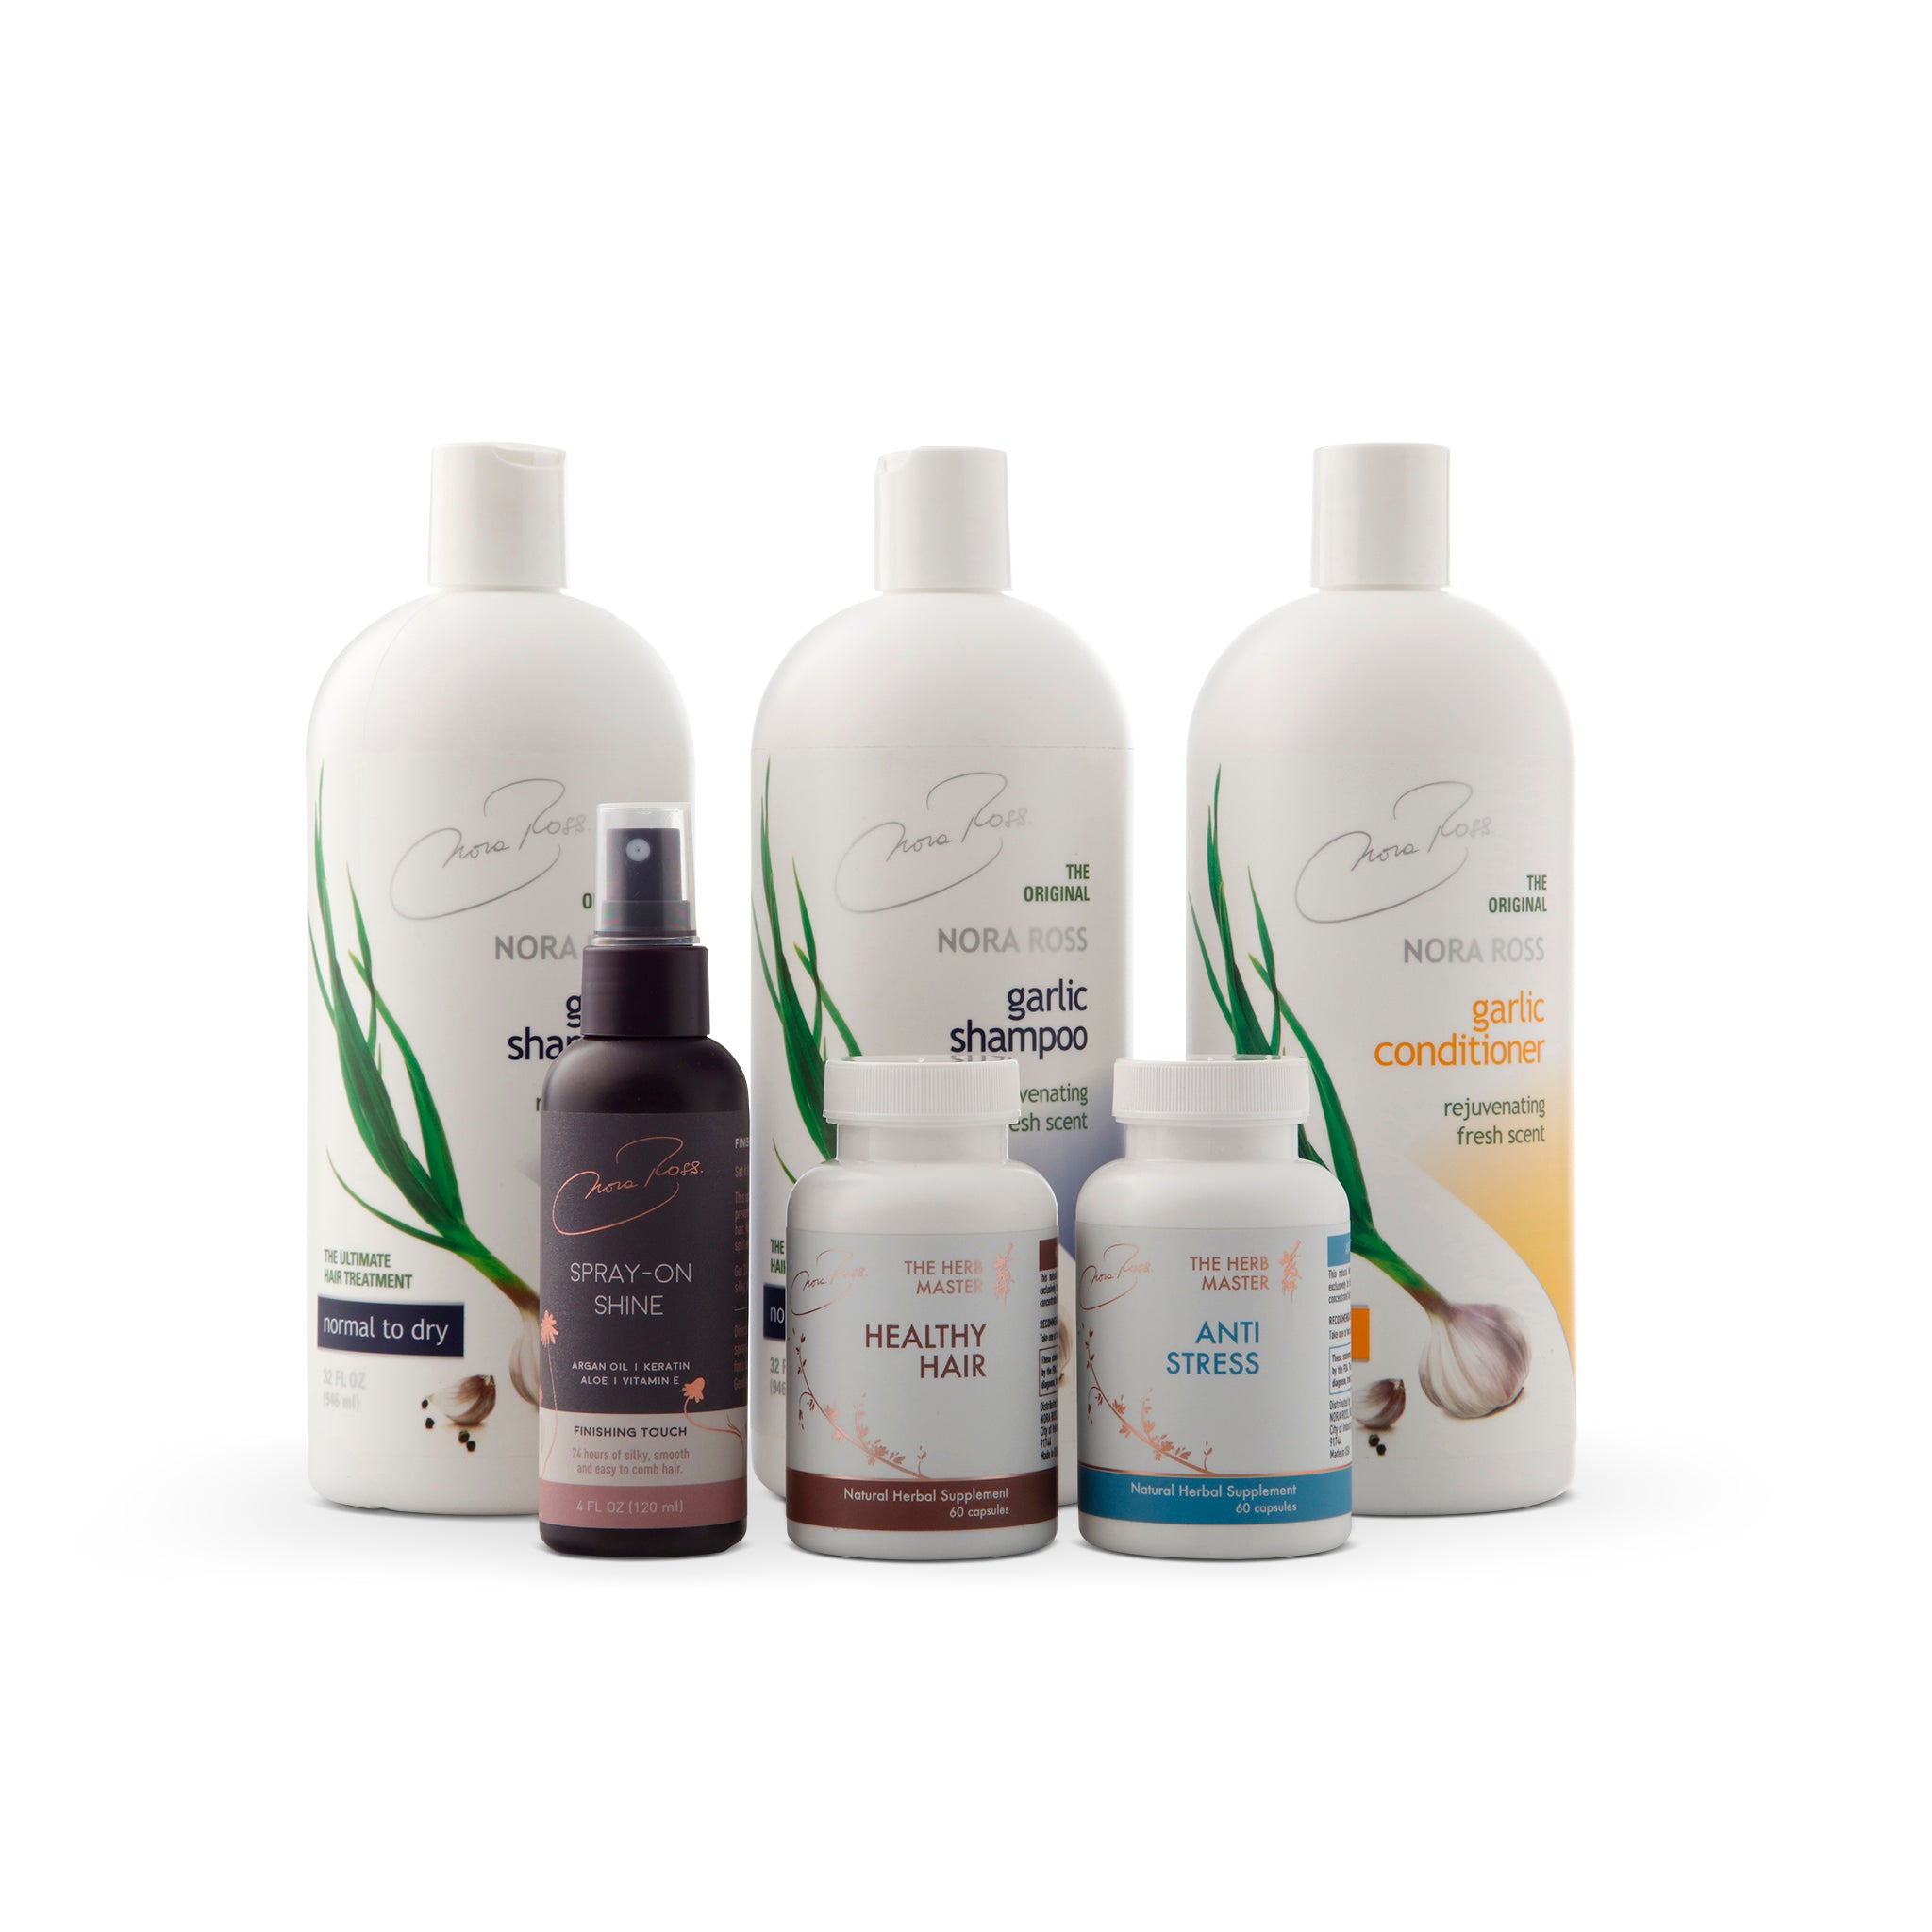 Complete Healthy Hair Supplements & Shampoo Bundle for Normal to Dry Hair Types